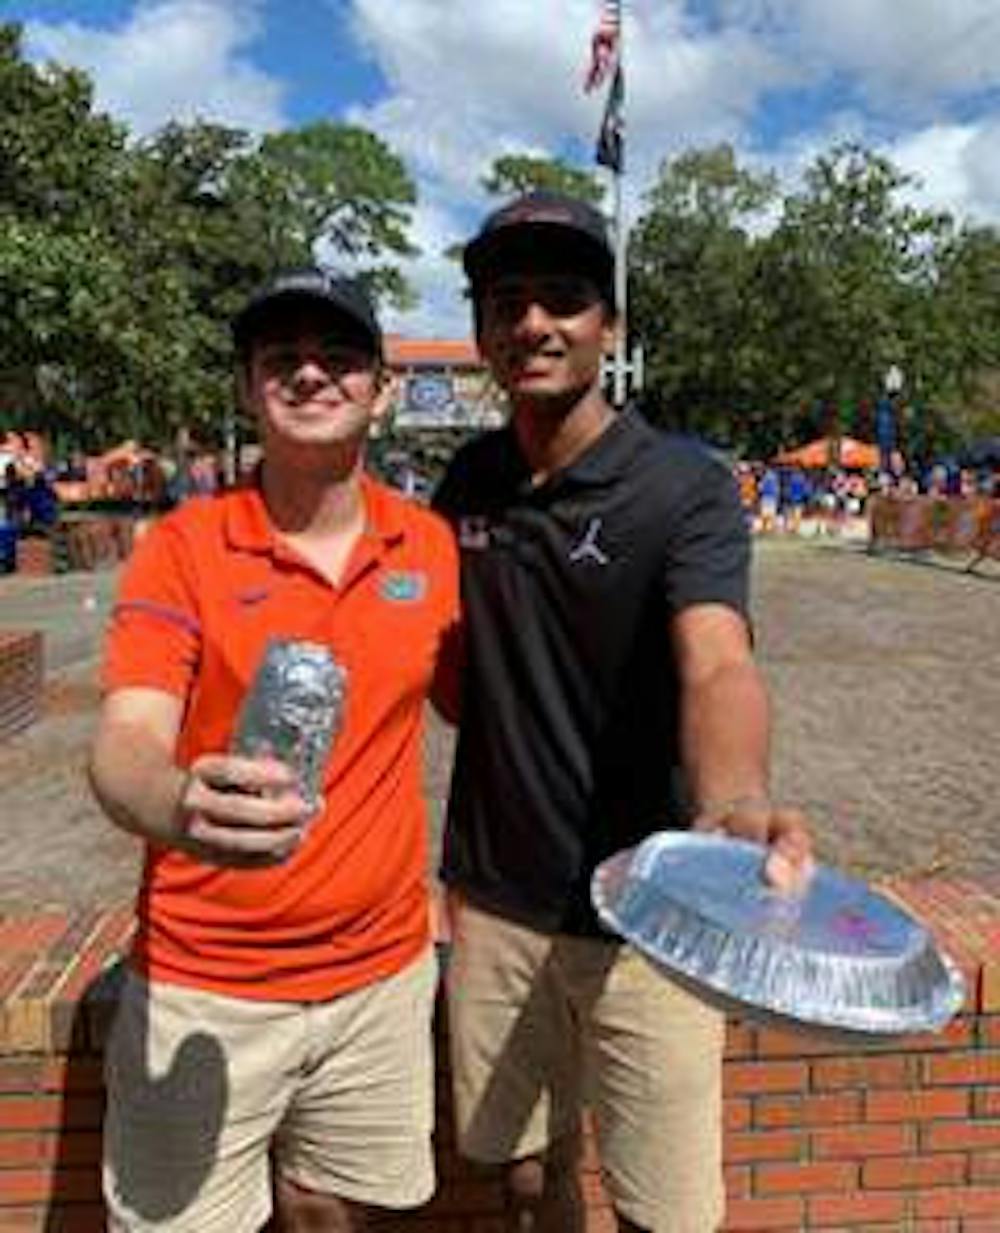 <p><span>Pawan Badisa (right) poses with the Chipotle given to him at Century Tower after his sign was shown on ESPN's College GameDay. He received a DM from Chipotle letting him know his order was waiting for him at the tower and that he would be given free Chipotle for a year.</span></p>